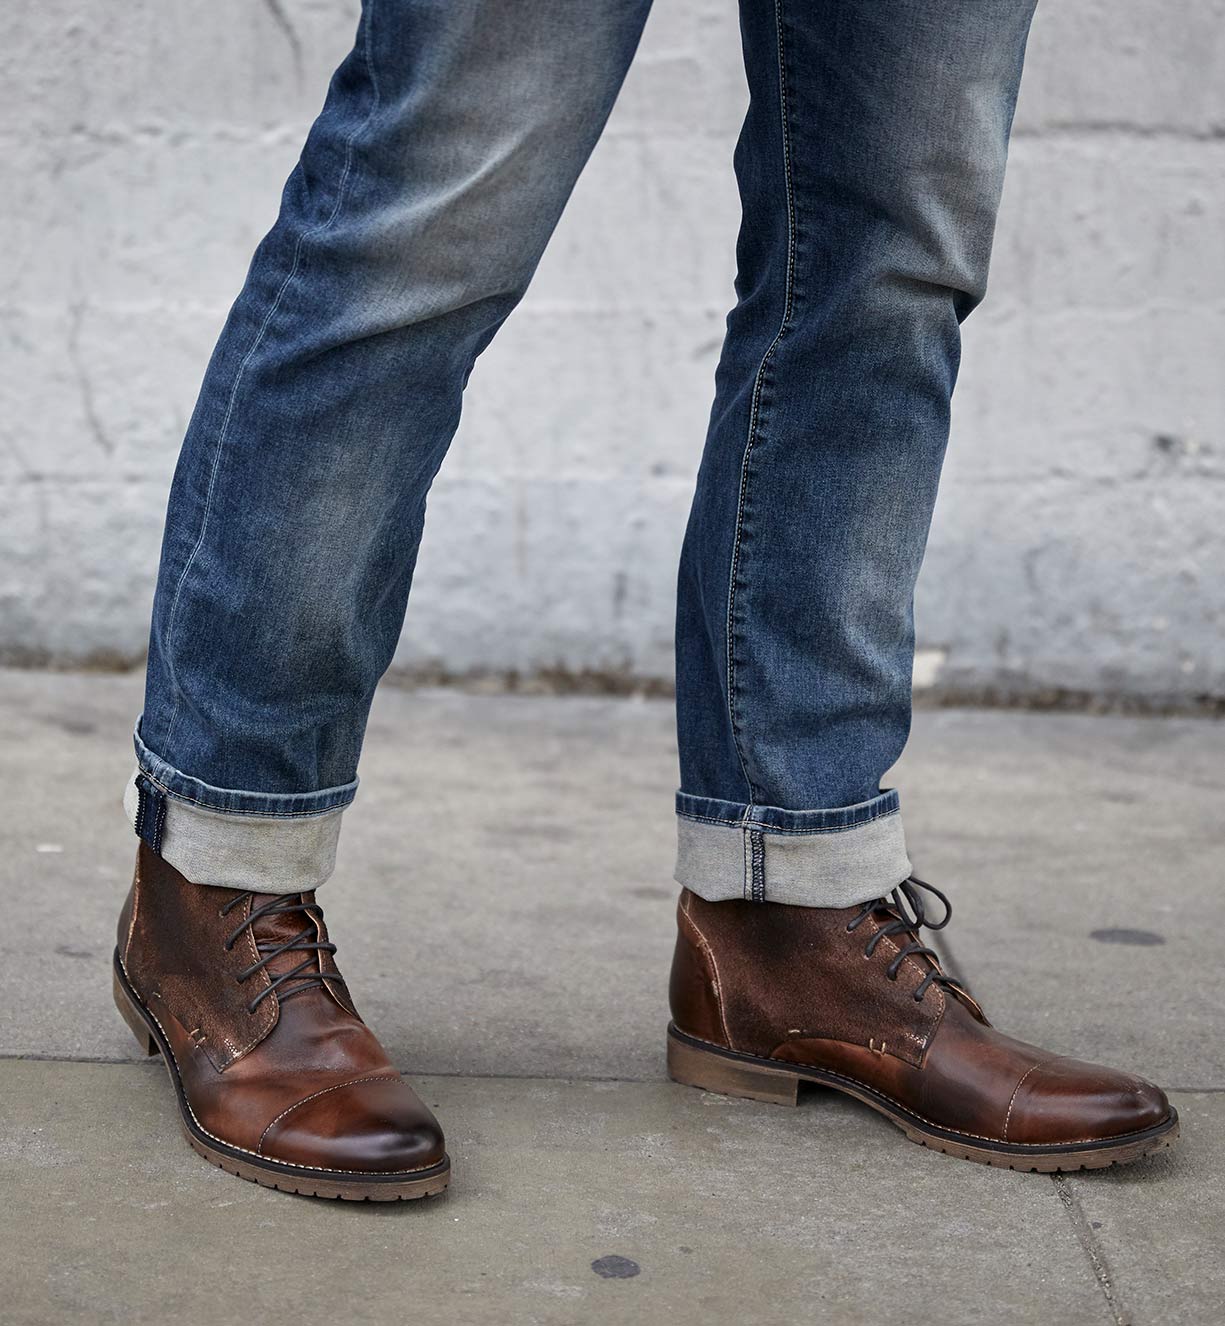 A man wearing jeans and a pair of Bed Stu Dreck boots.